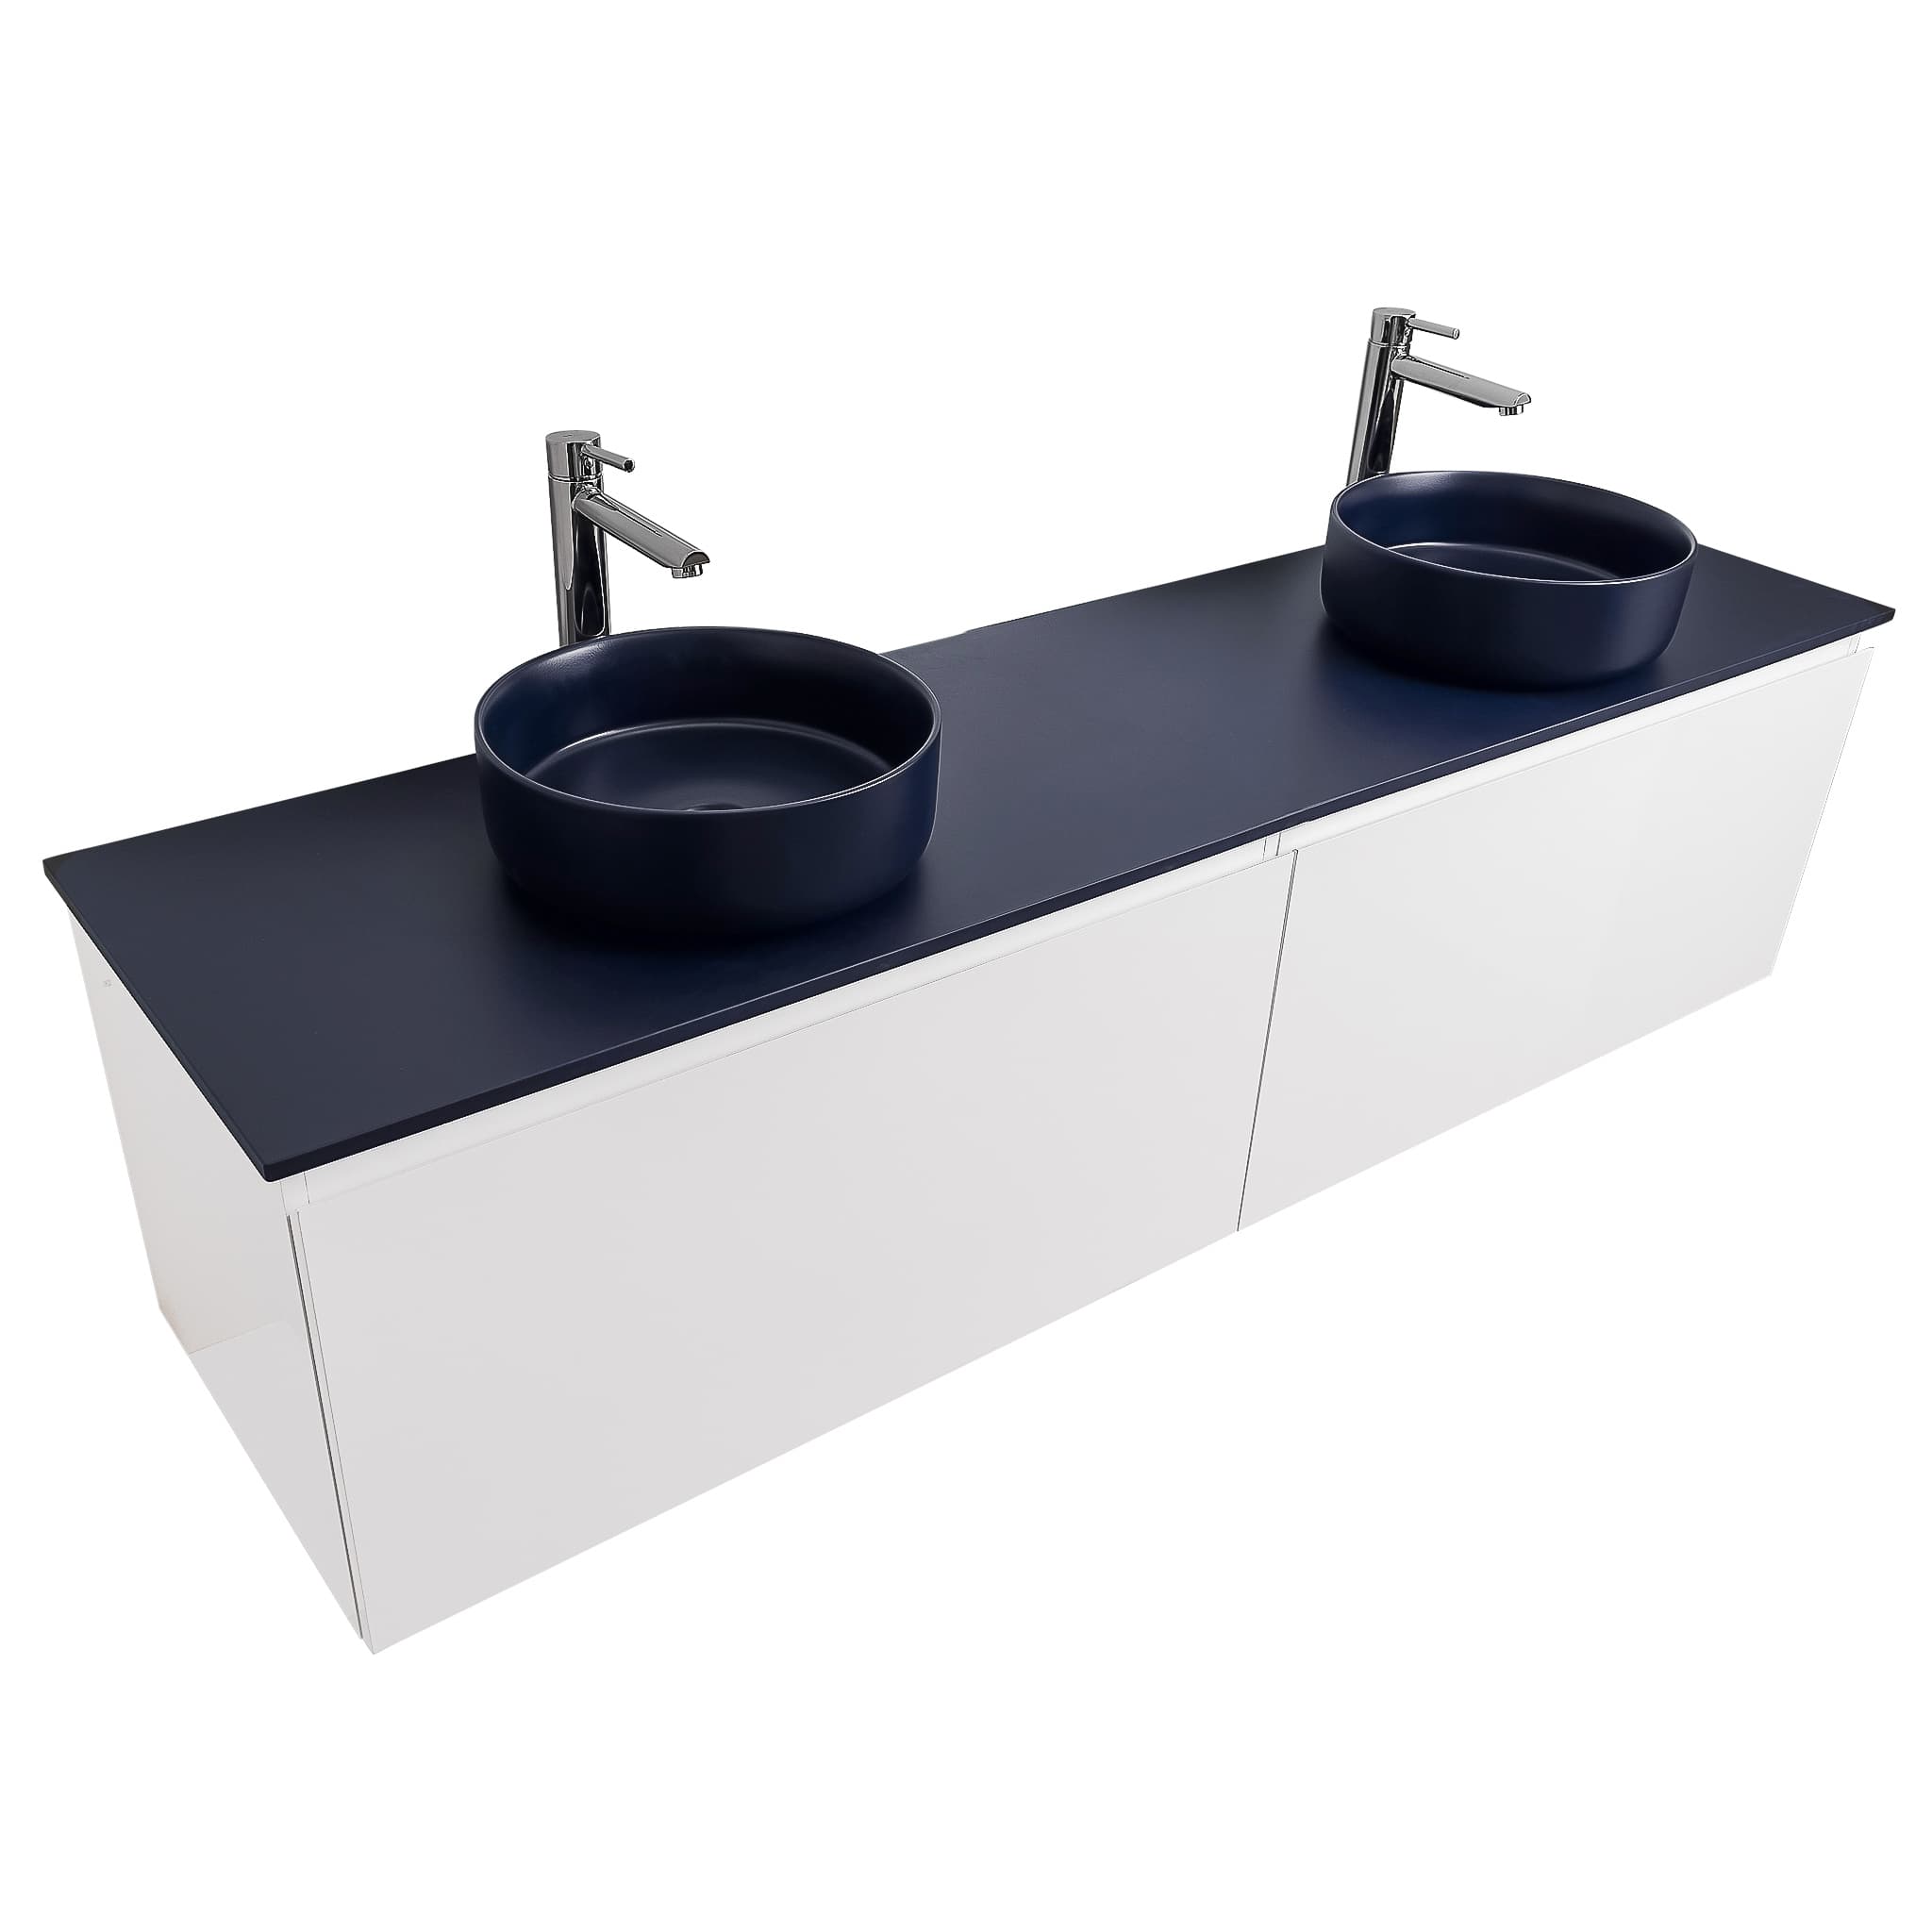 Venice 72 White High Gloss Cabinet, Ares Navy Blue Top And Two Ares Navy Blue Ceramic Basin, Wall Mounted Modern Vanity Set